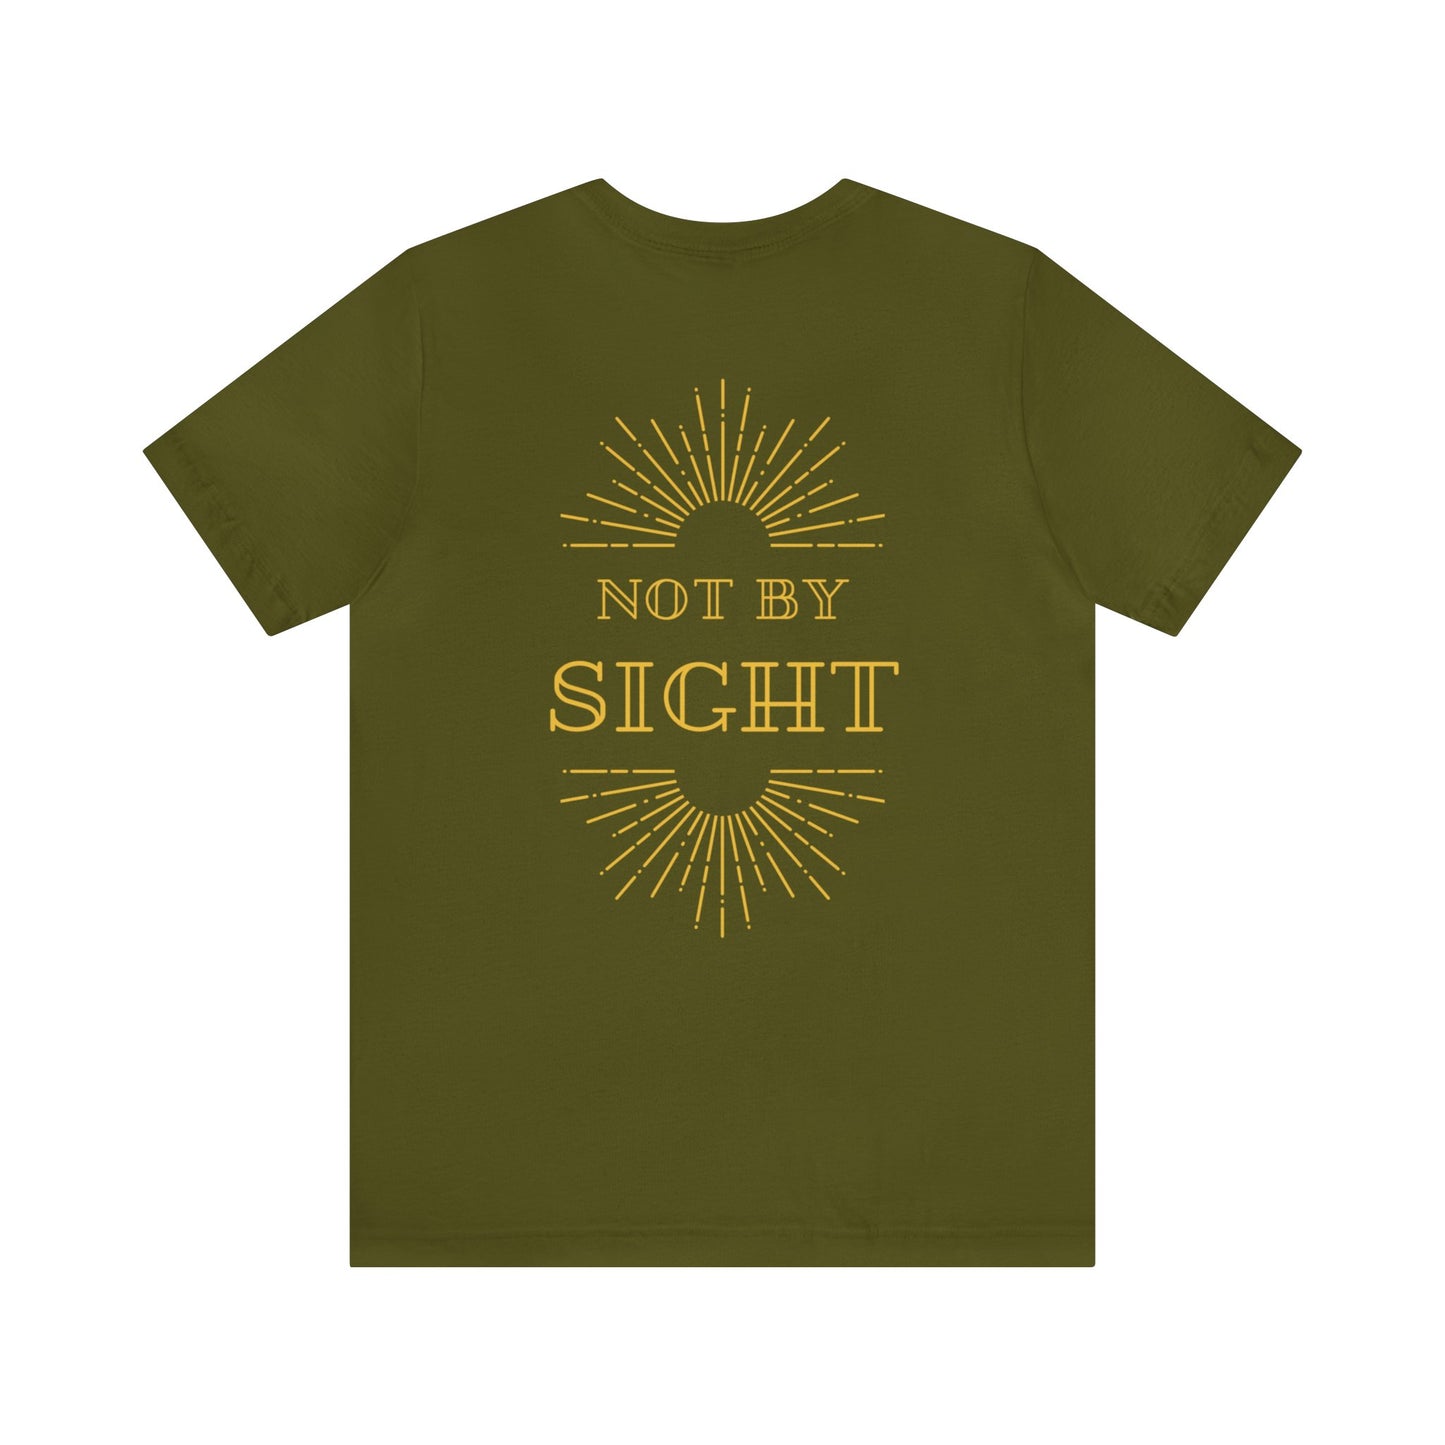 Walk By Faith Not By Sight T-Shirt - Front & Back Christian Tee Neutral Colors